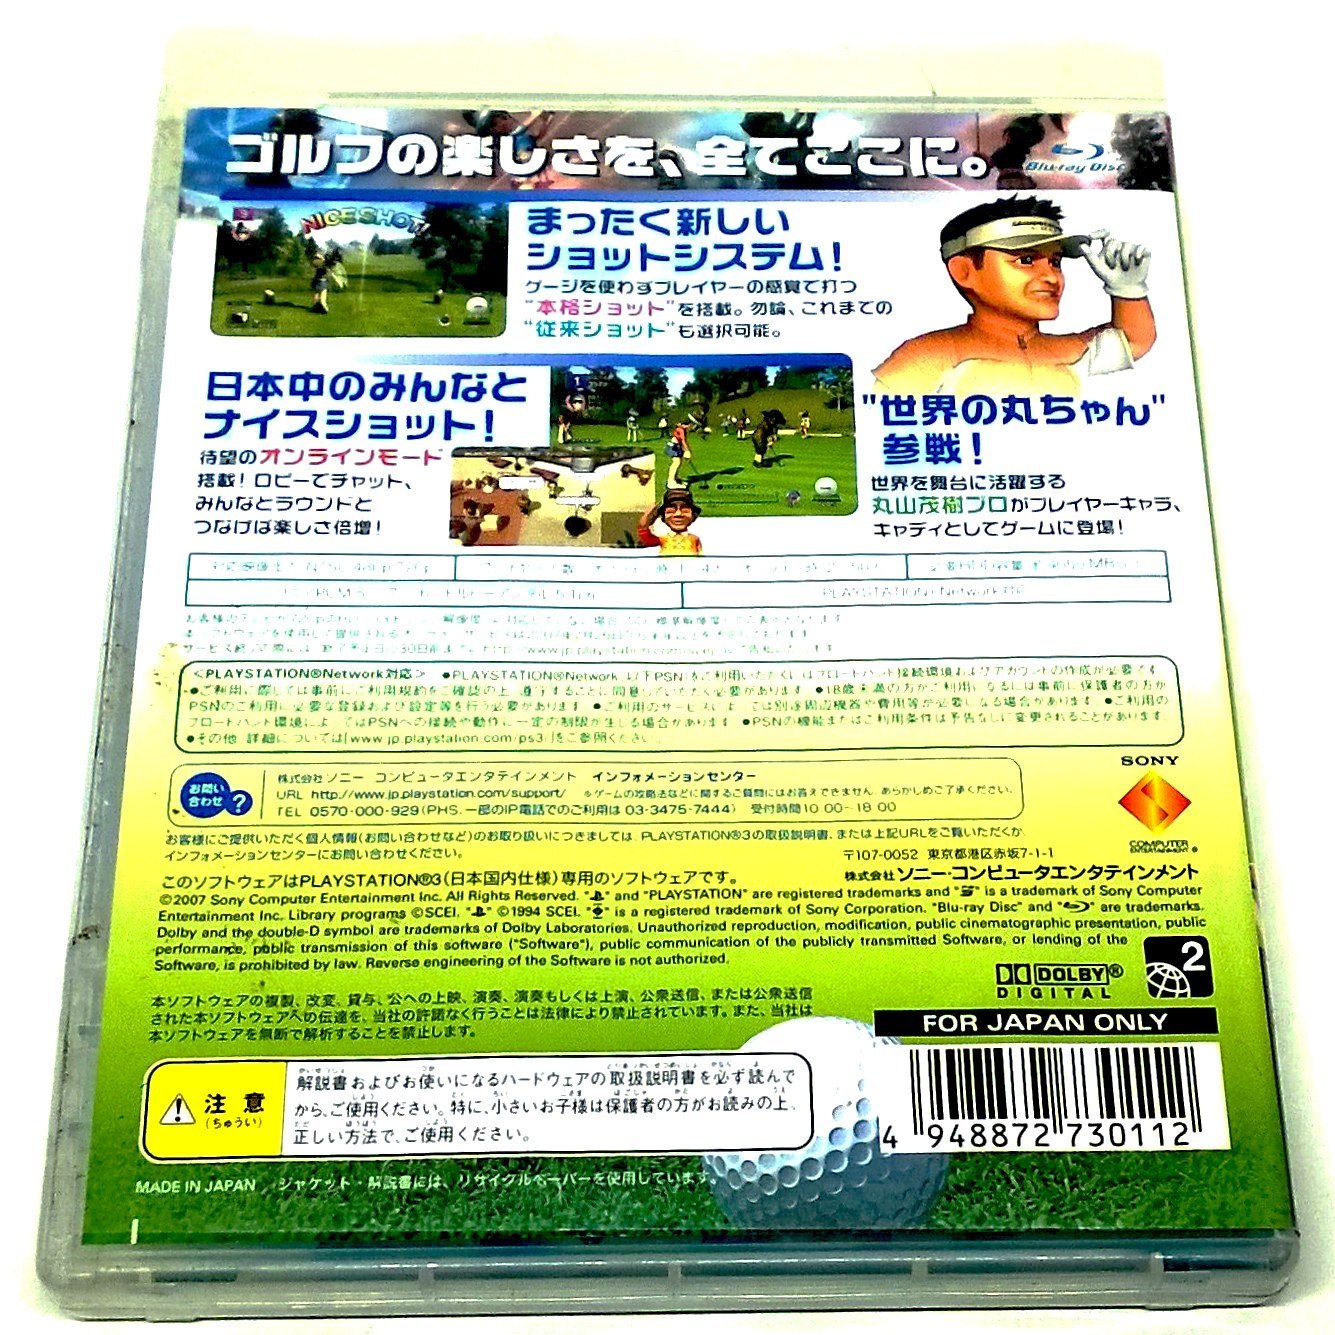 Minna no Golf 5 for PlayStation 3 (import) - Back of case